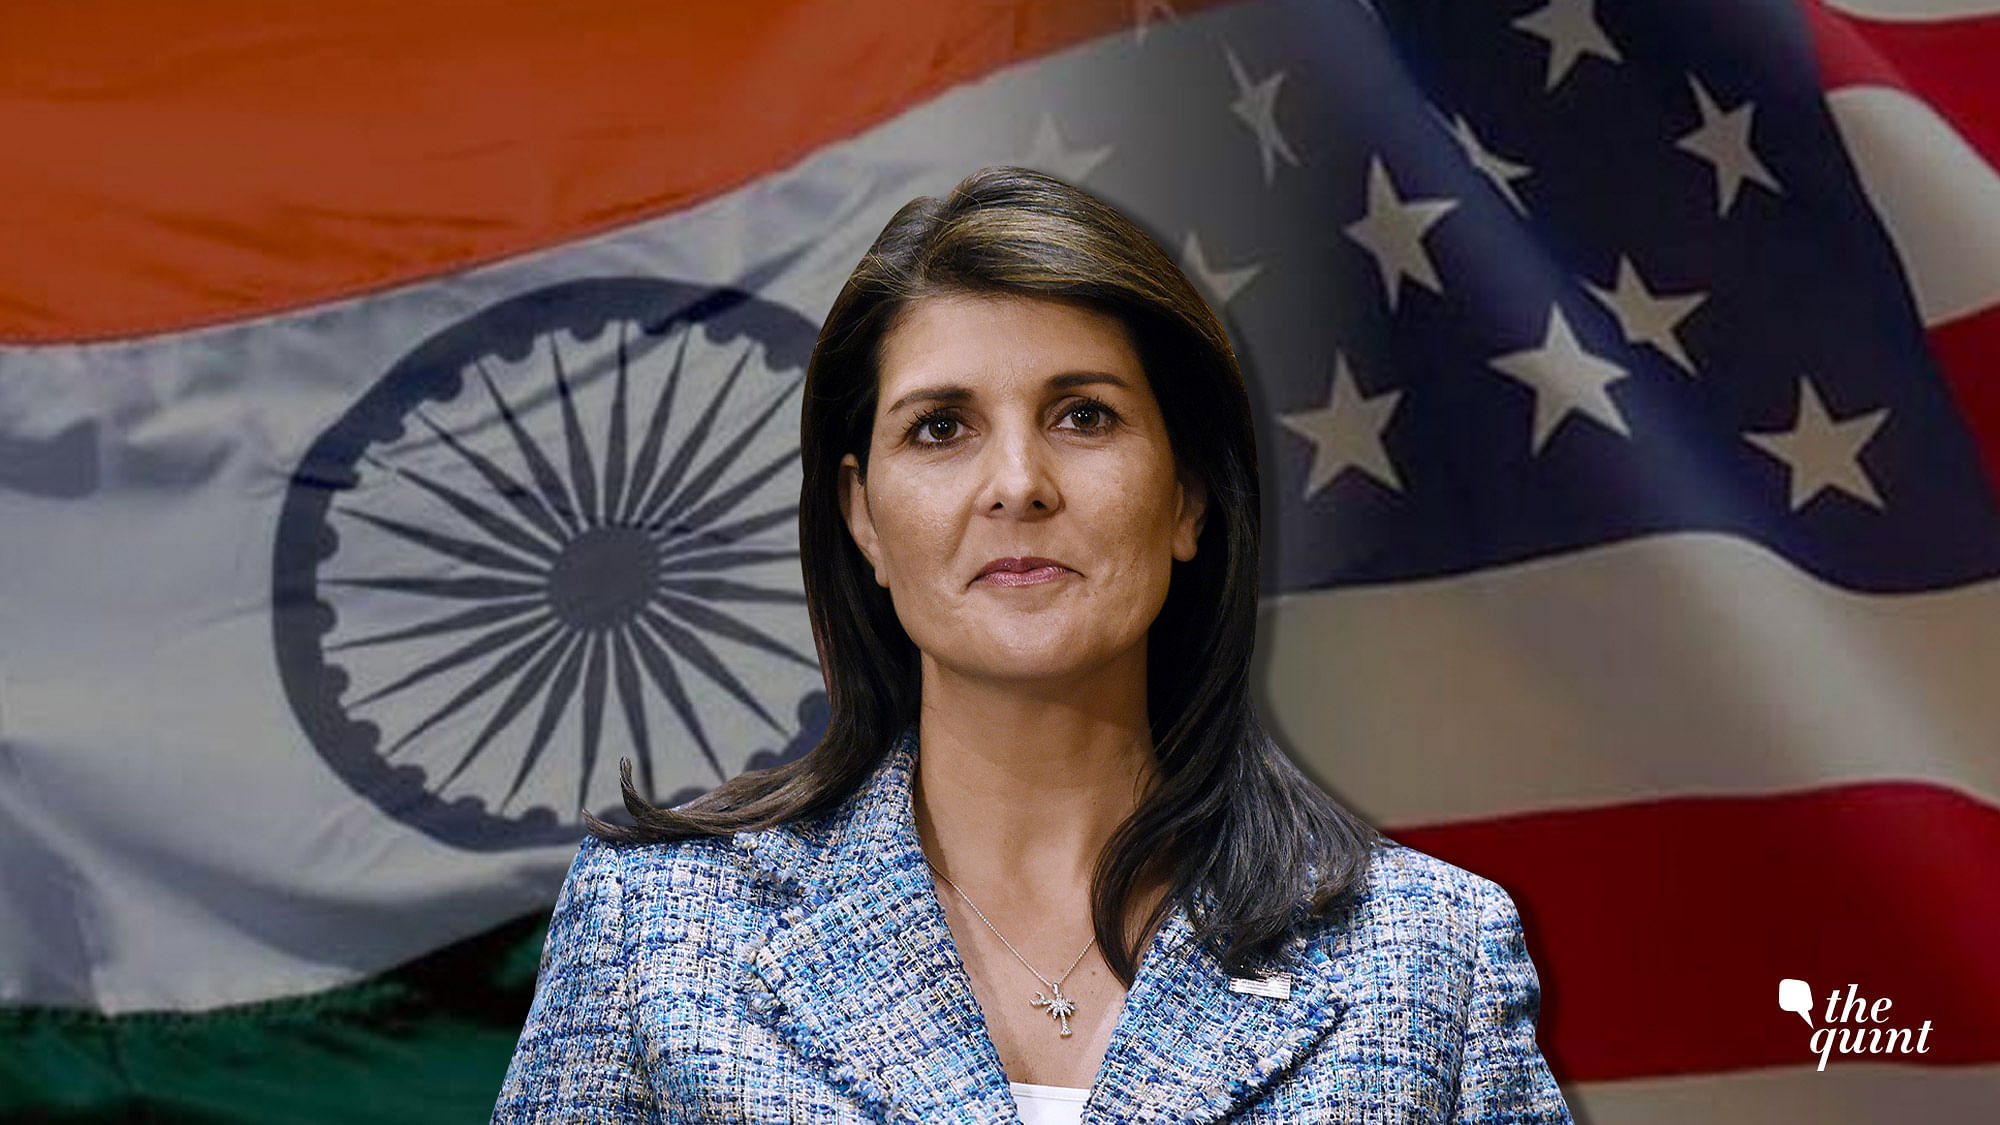 Image of Nikki Haley used for representational purposes.